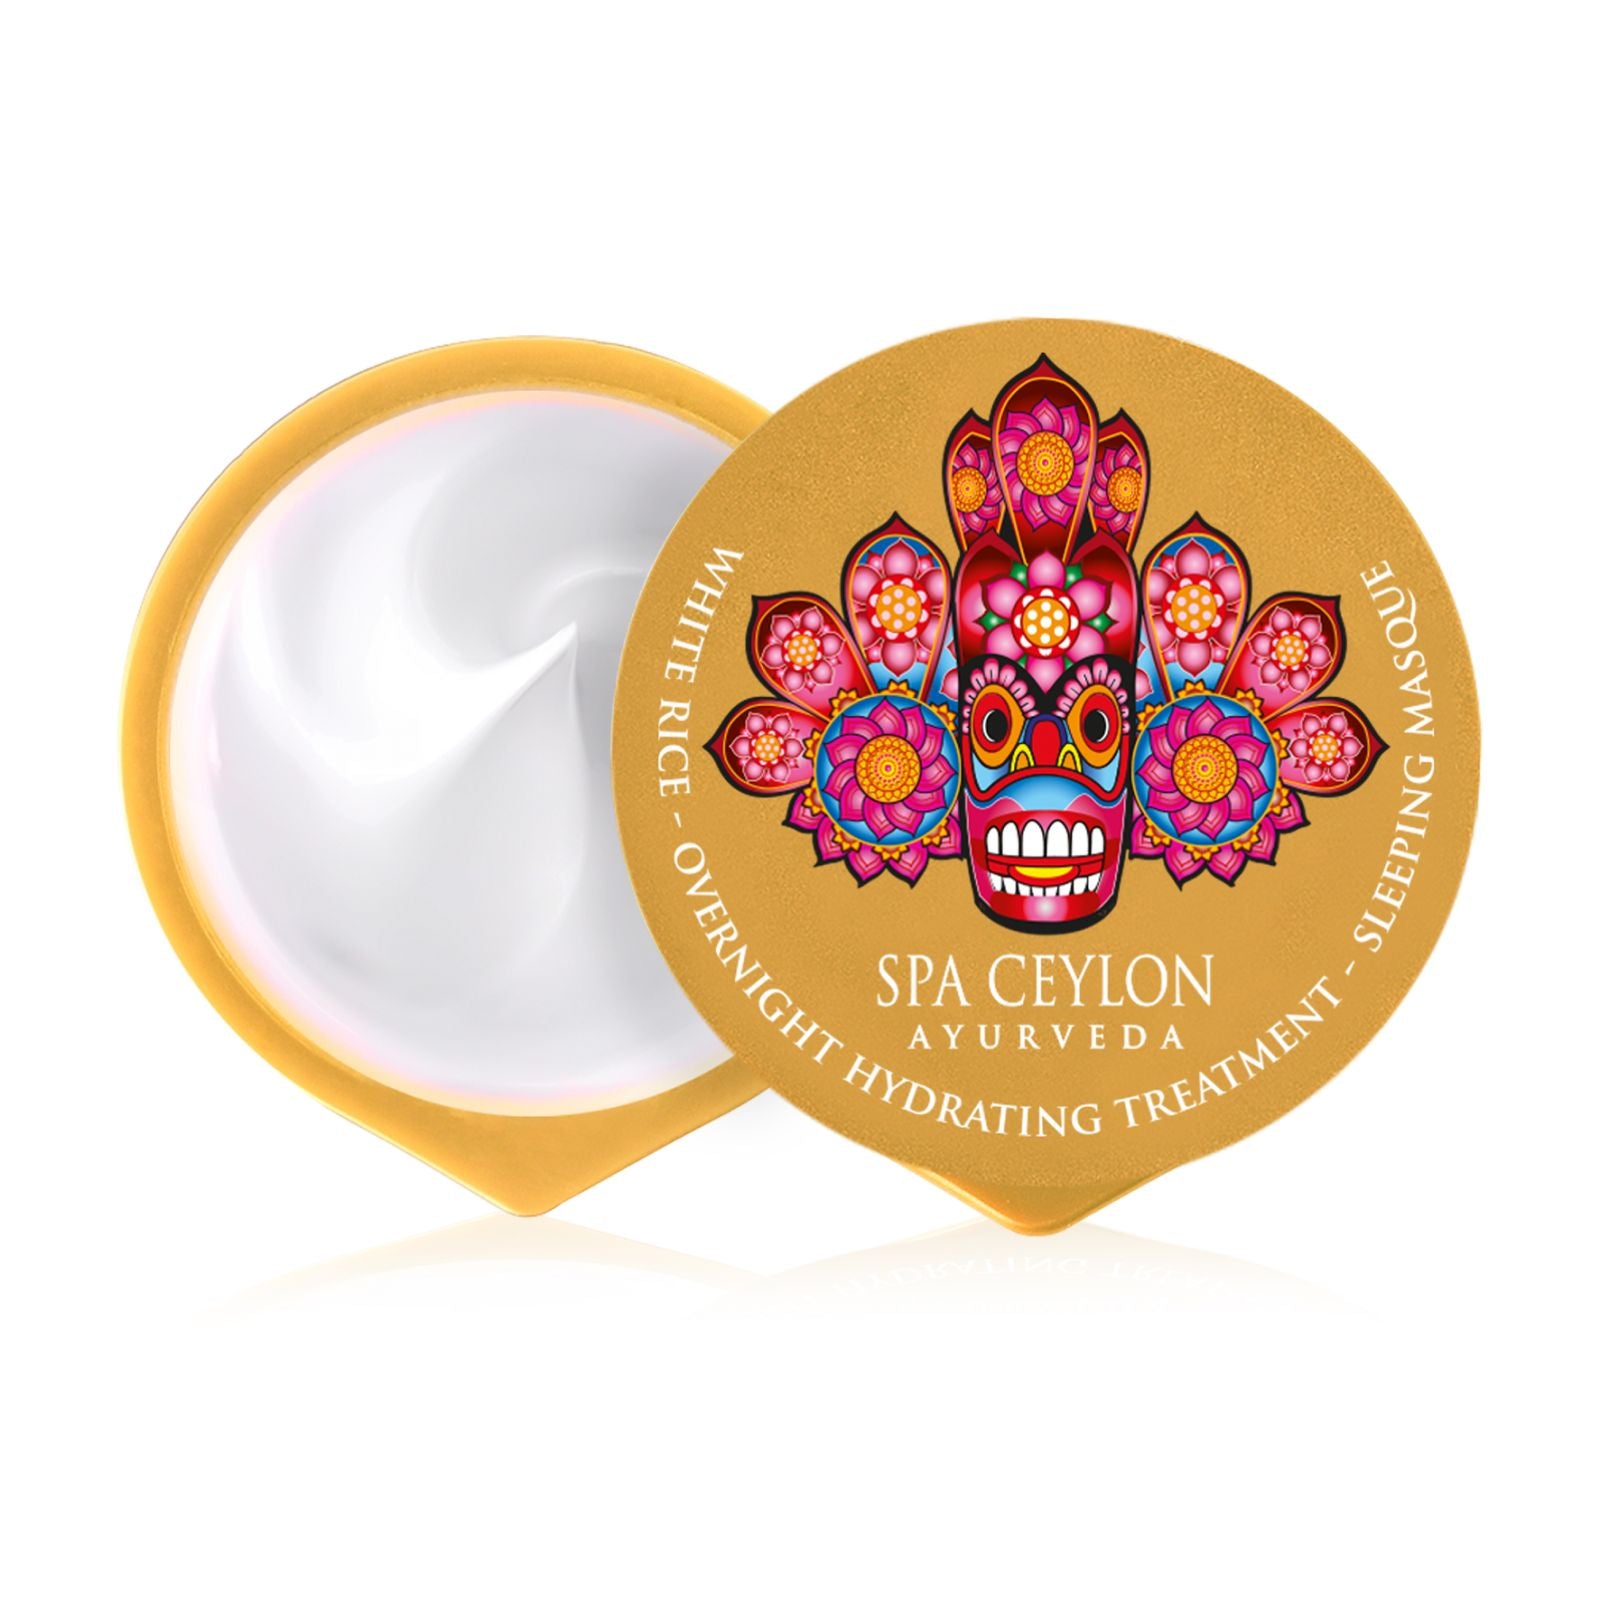 Special Offer Skincare Mask - White Rice